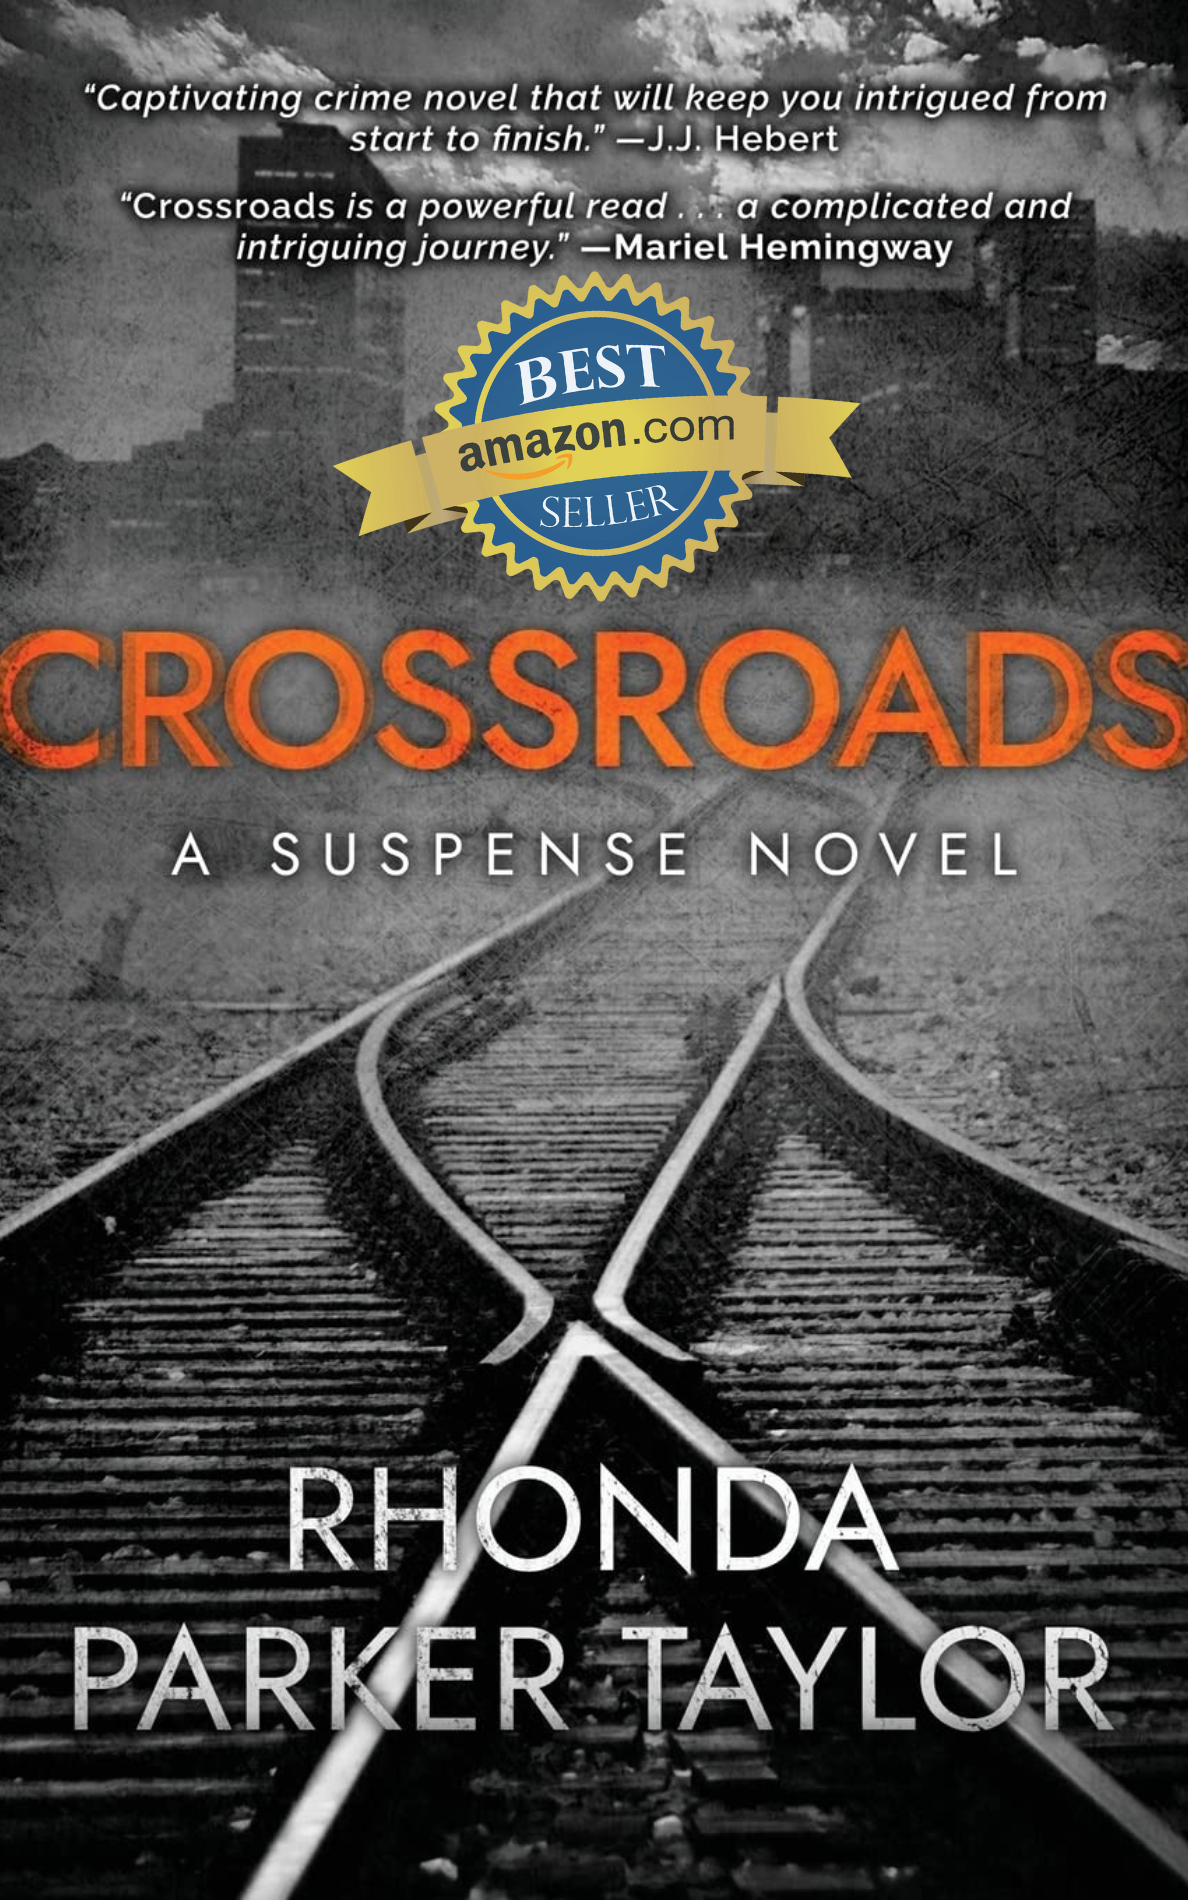 The front cover of Crossroads by Rhonda Parker Taylor